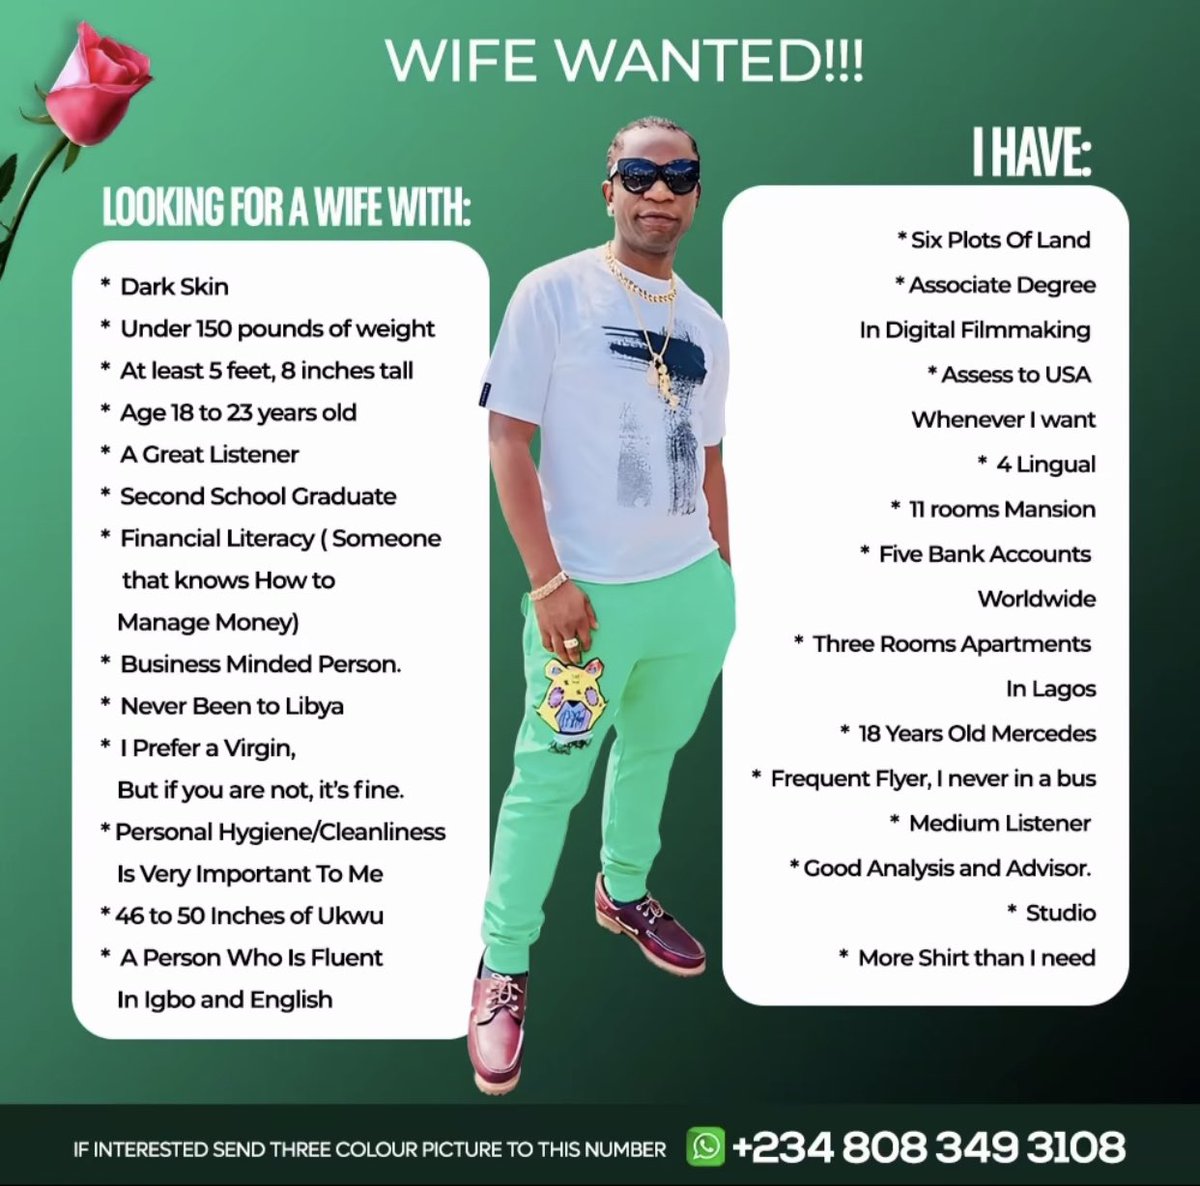 Attention ❗️❗️❗️ Speed Darlington a.k.a is looking for a wife. We Akpians are in search of our first Lady! Apply Sharp Sharp 😂😂😂😂😂